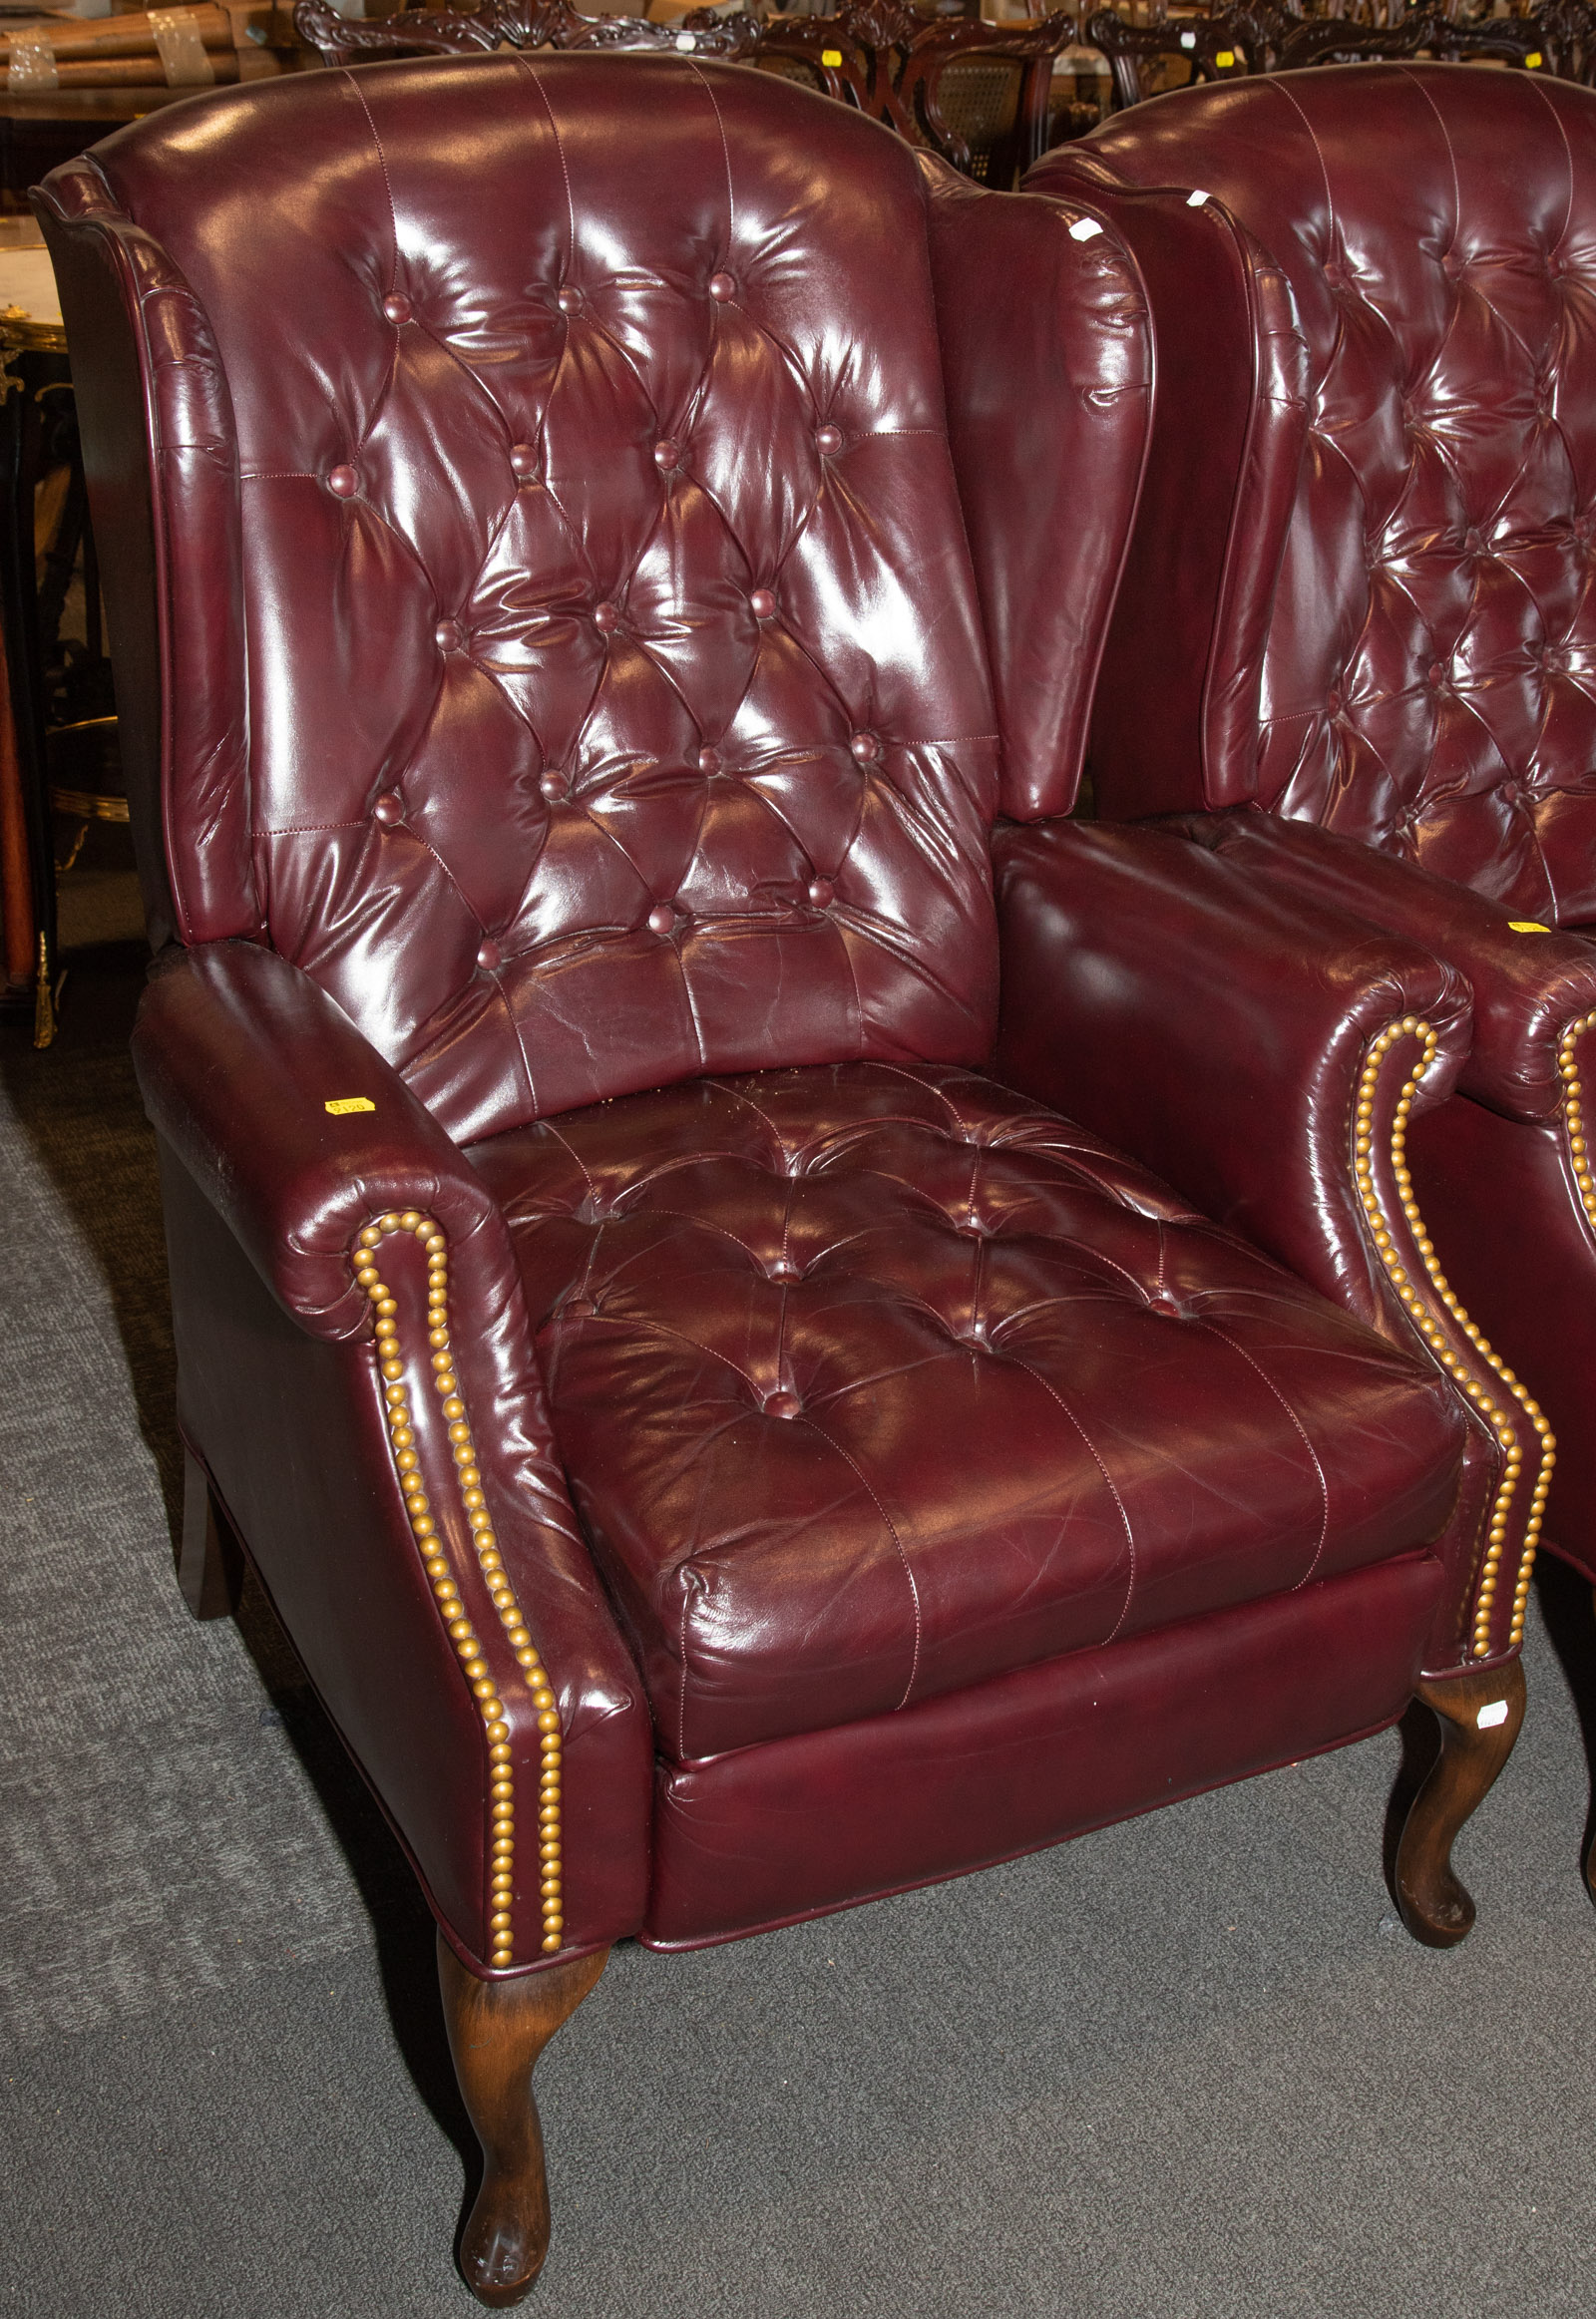 A MAROON LEATHER RECLINING WING